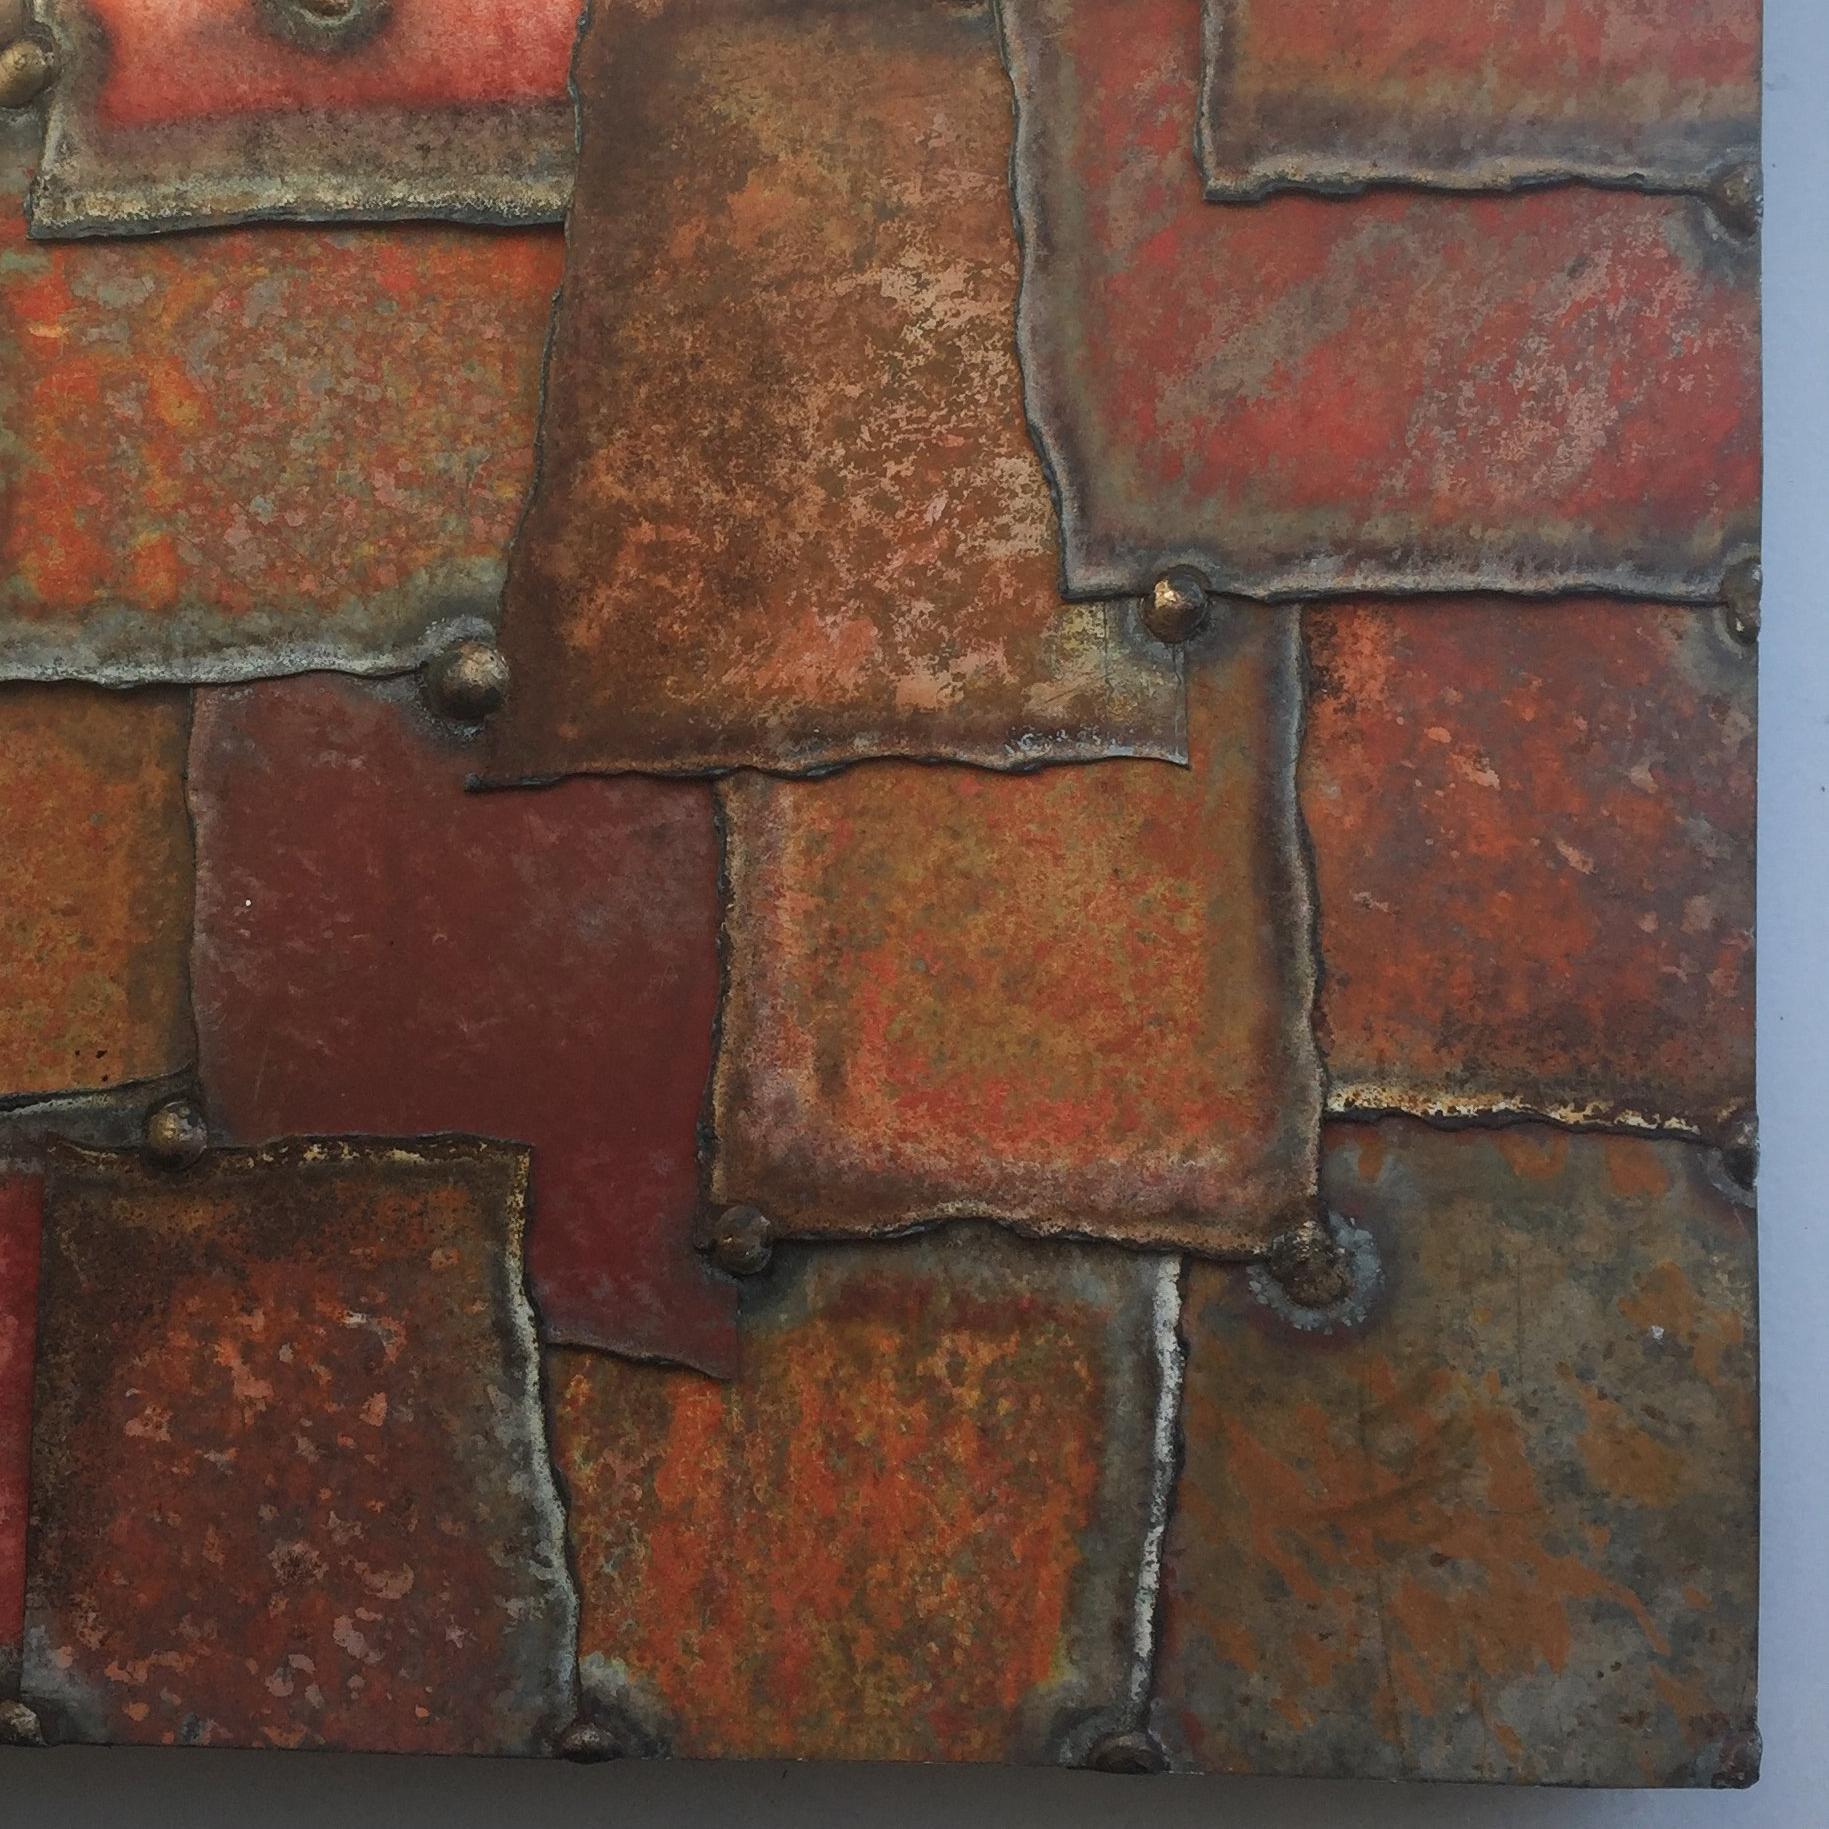 Untitled (SMALL STEEL WORK, OXIDIZED BRASS RED)
Pure Pigments, Steel 
Sculpture with Industrial Urbanized Metal Materials
12